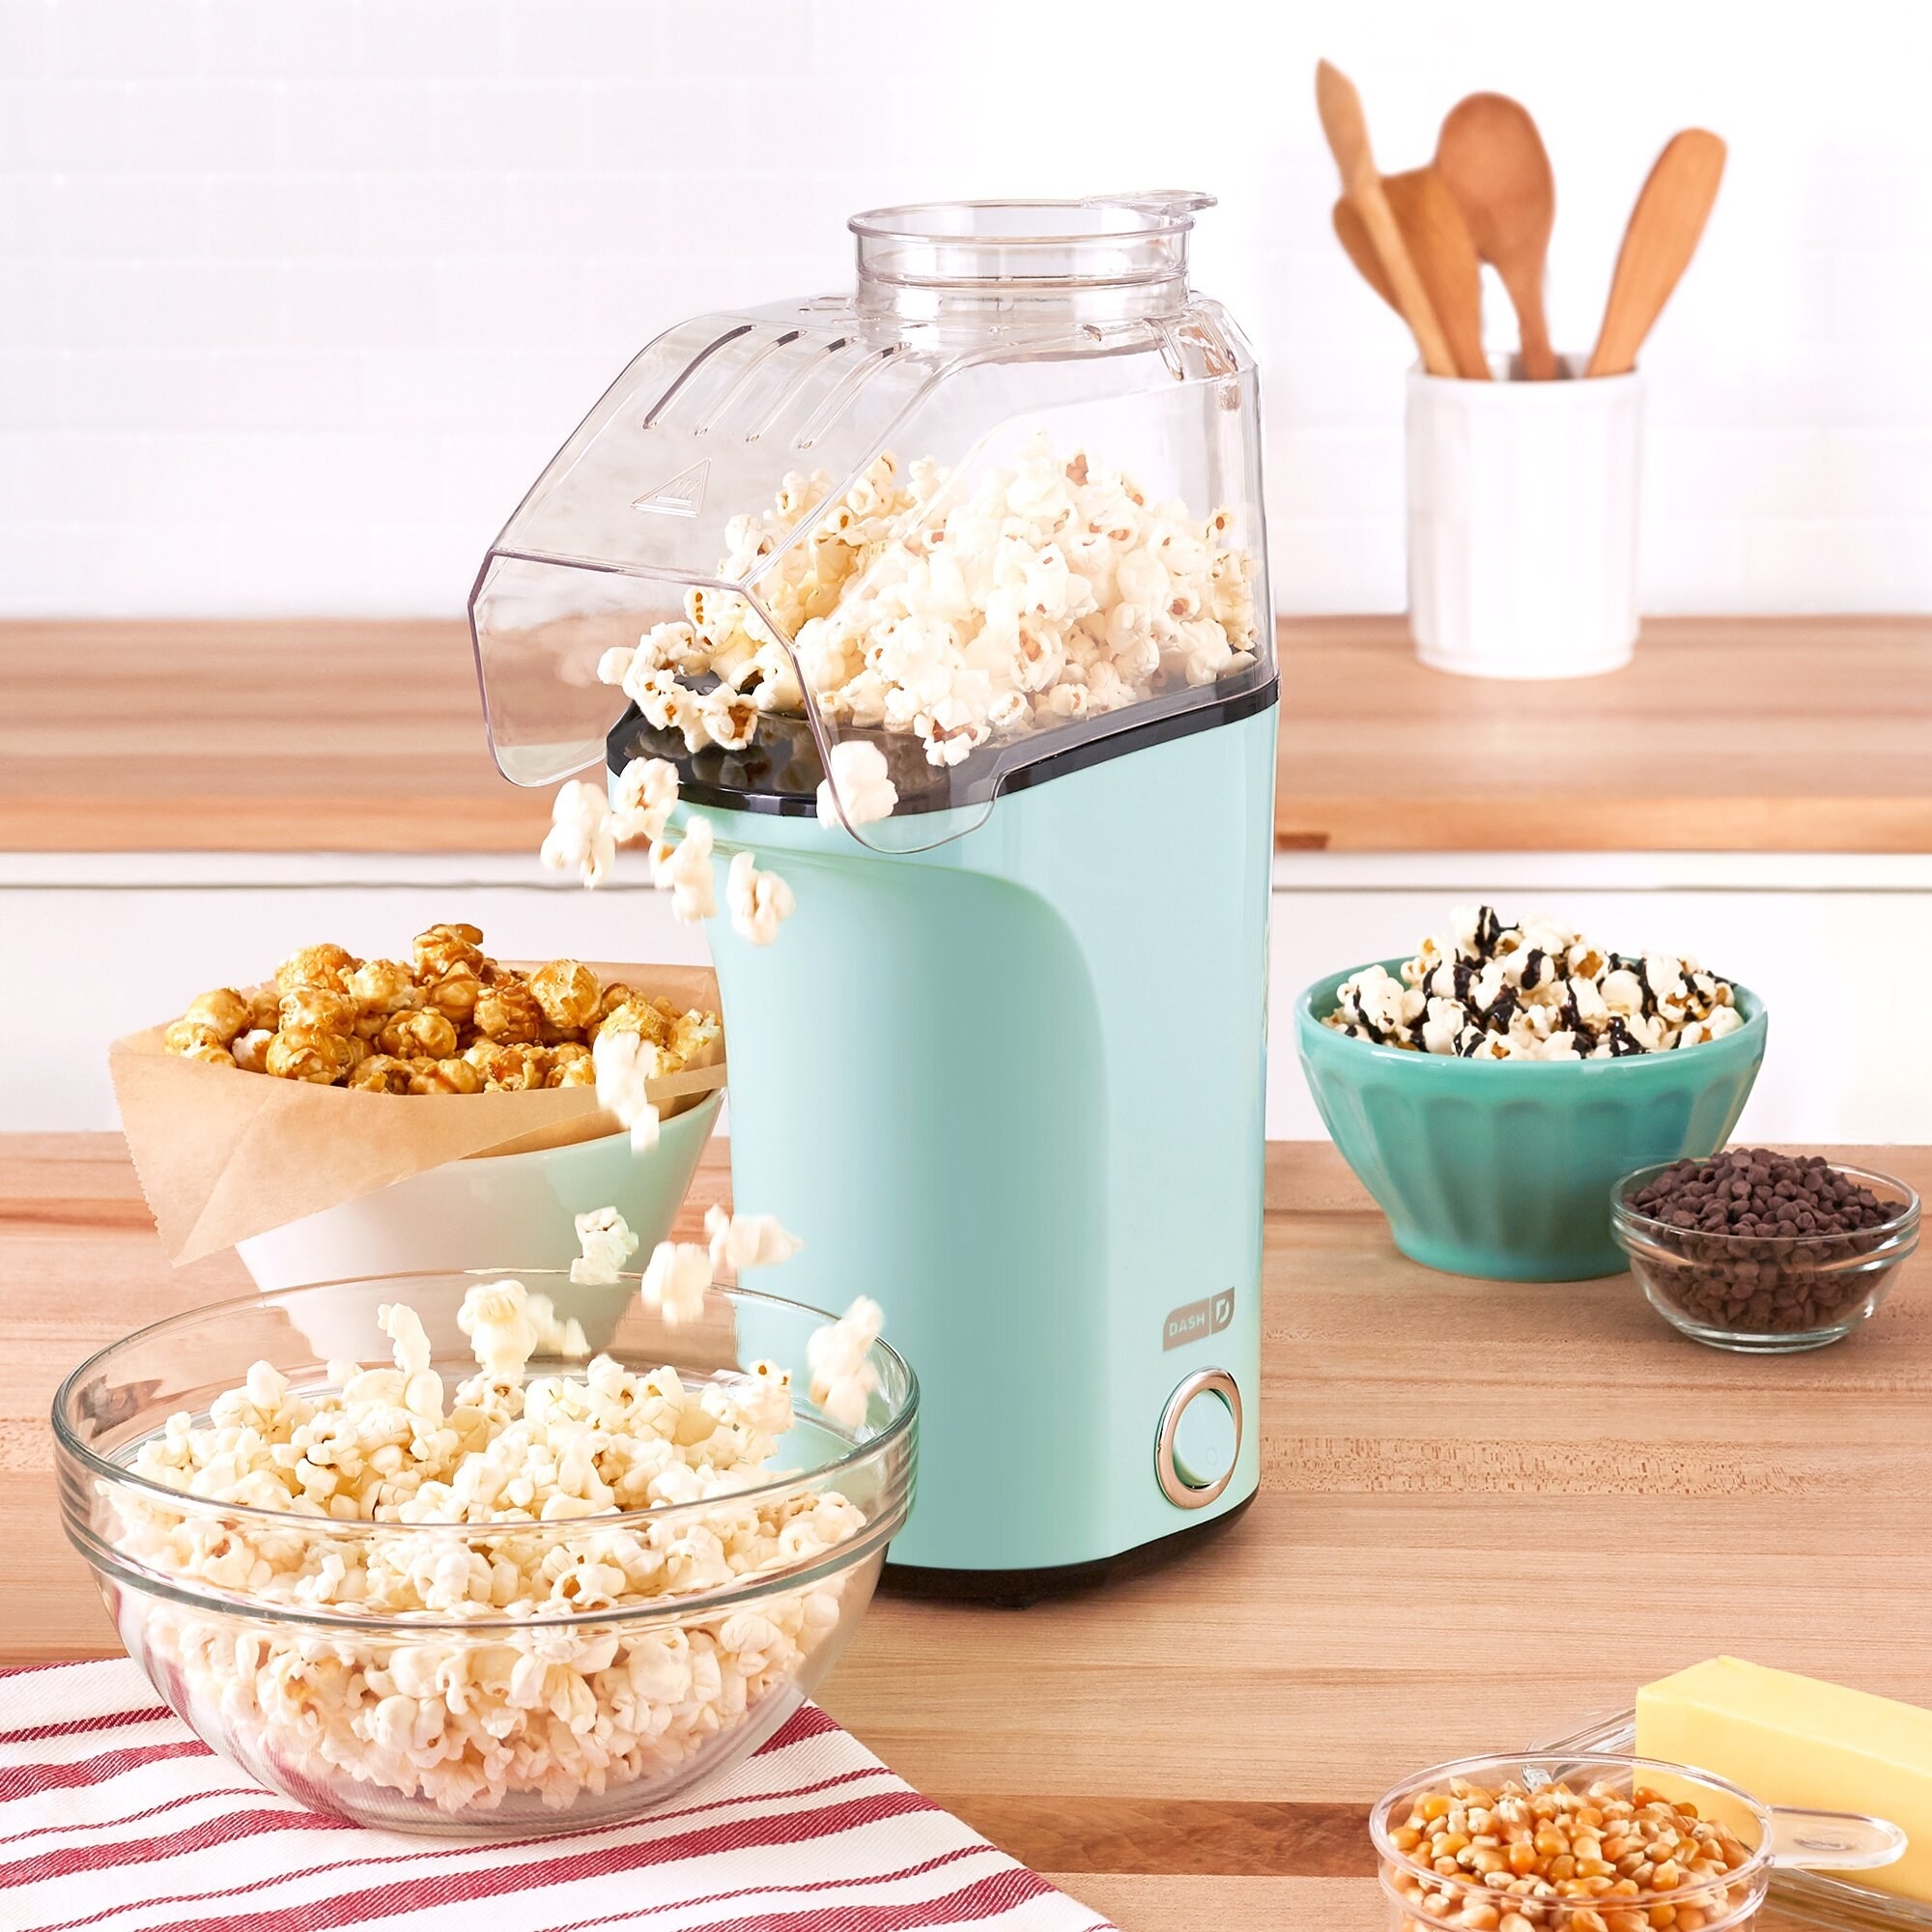 The popcorn maker on a table